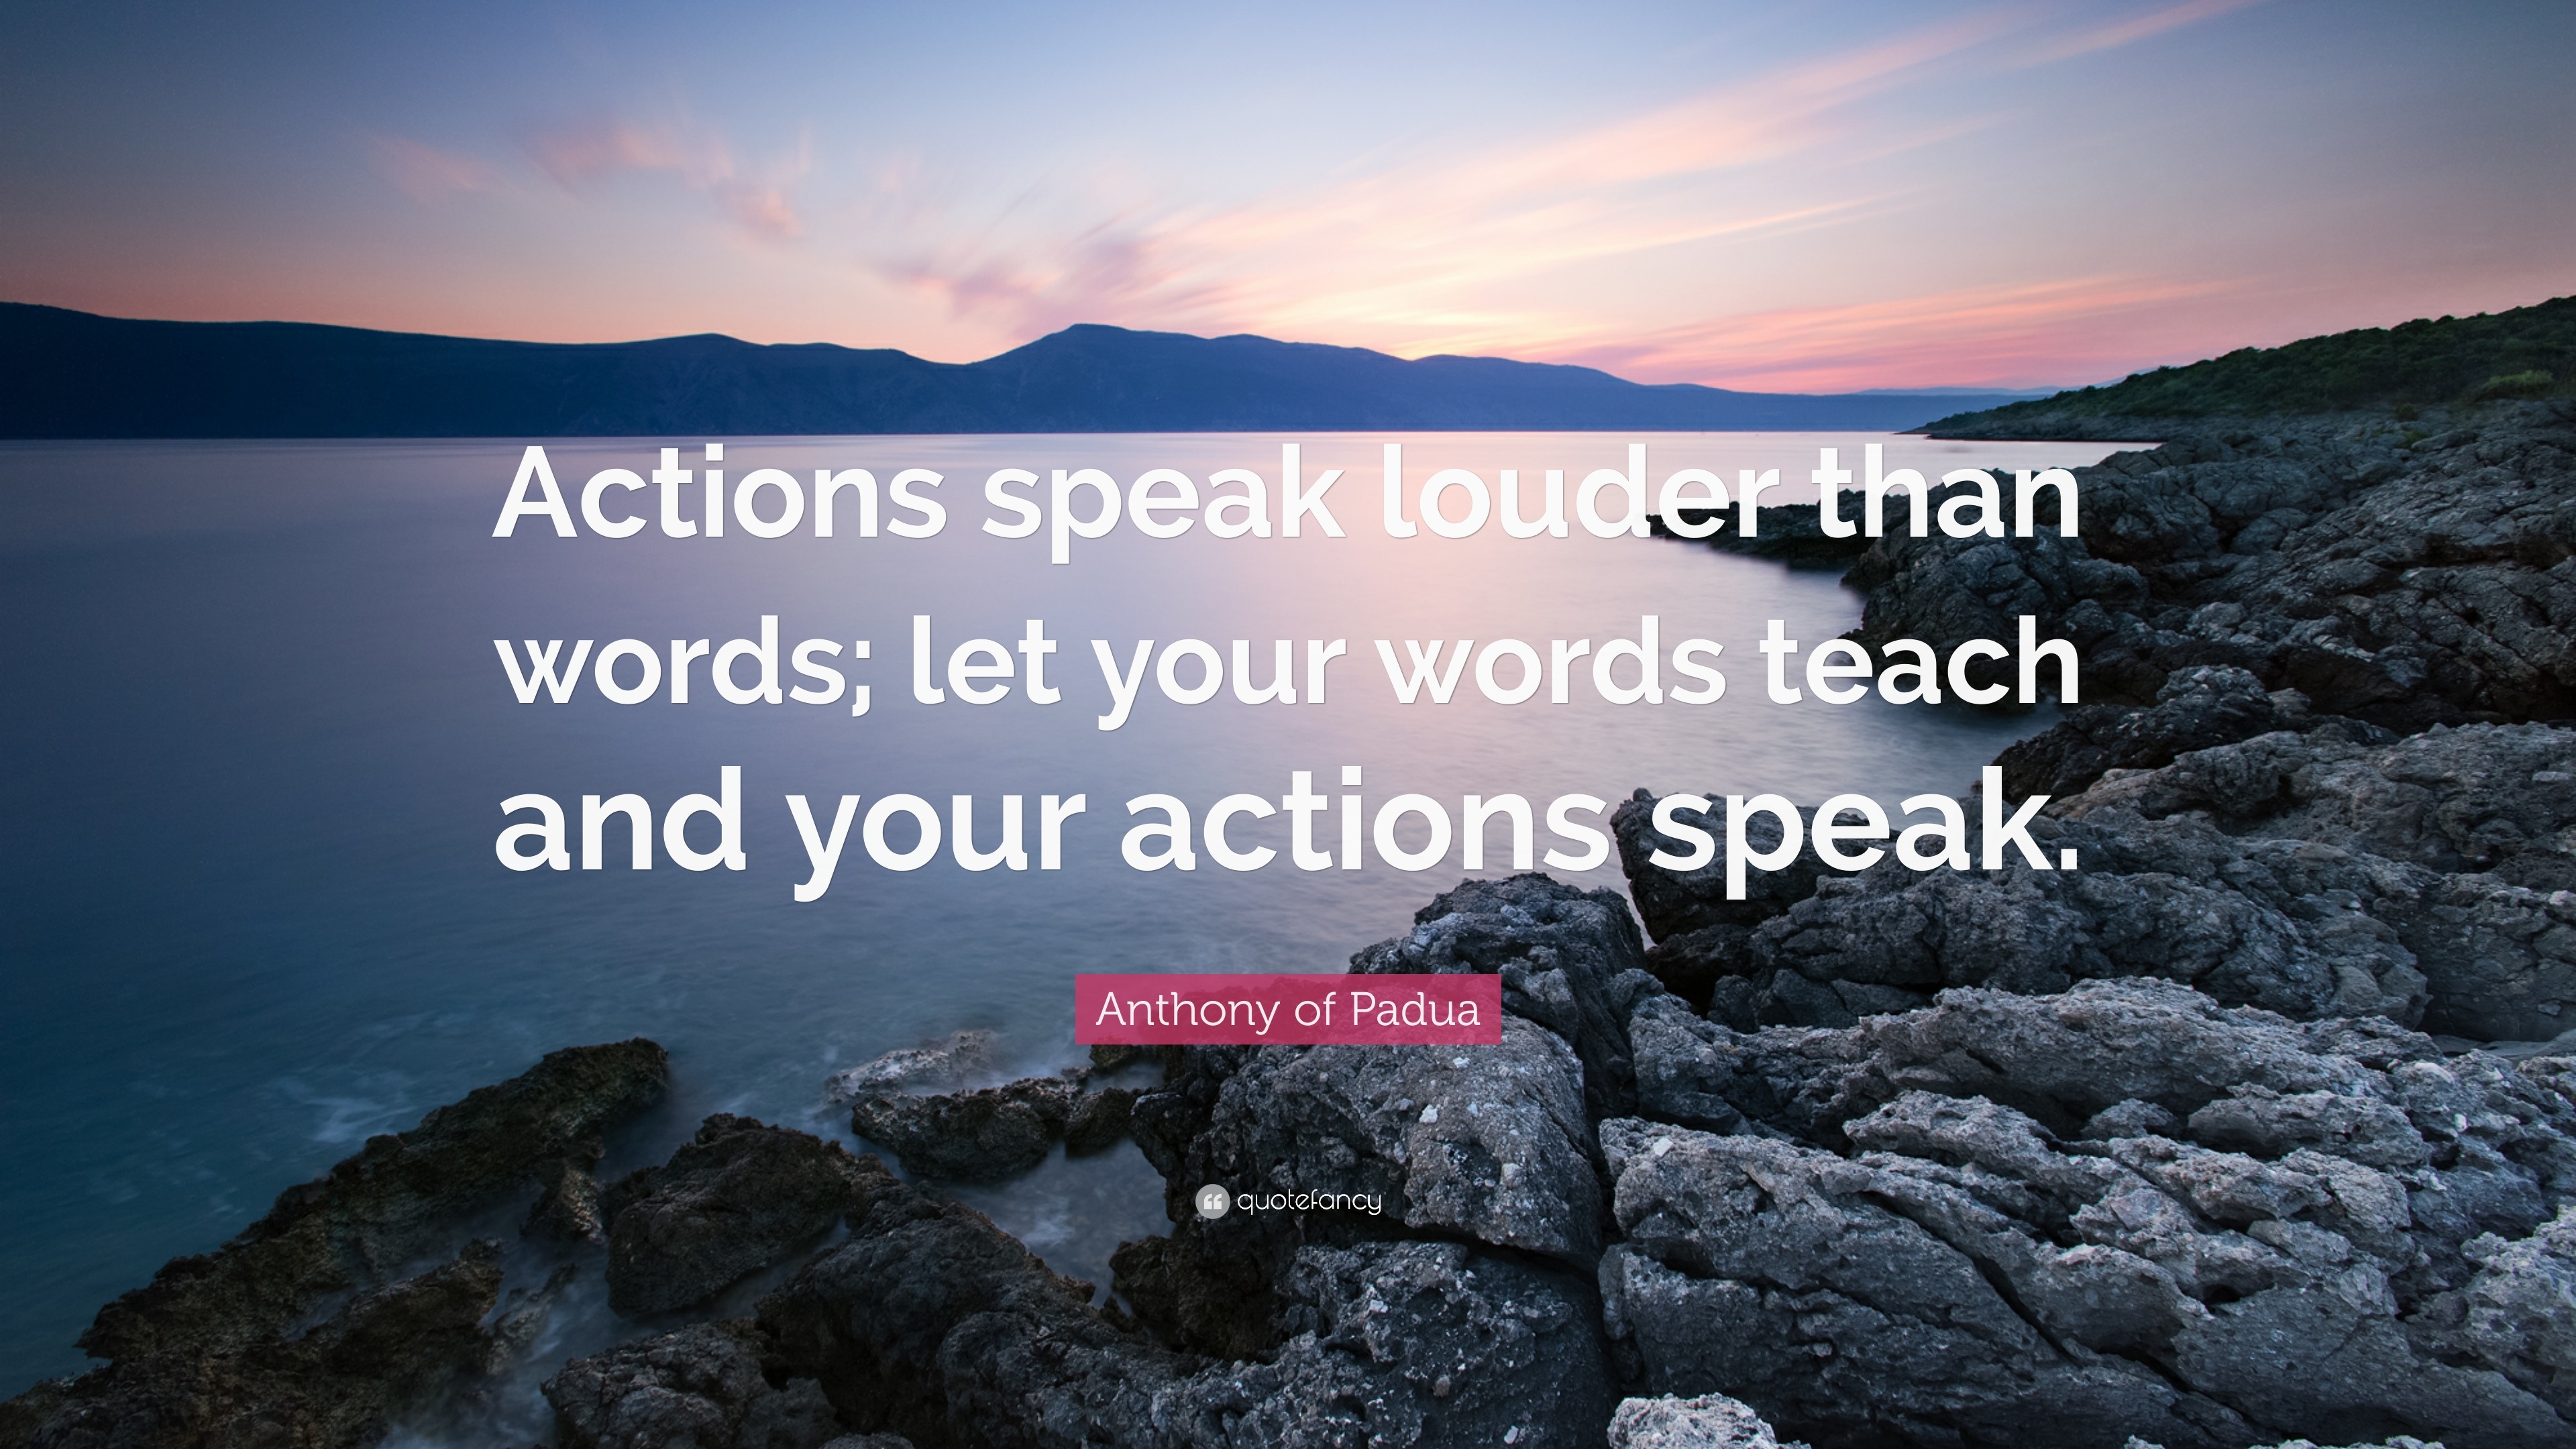 Anthony of Padua Quote: “Actions speak louder than words; let your